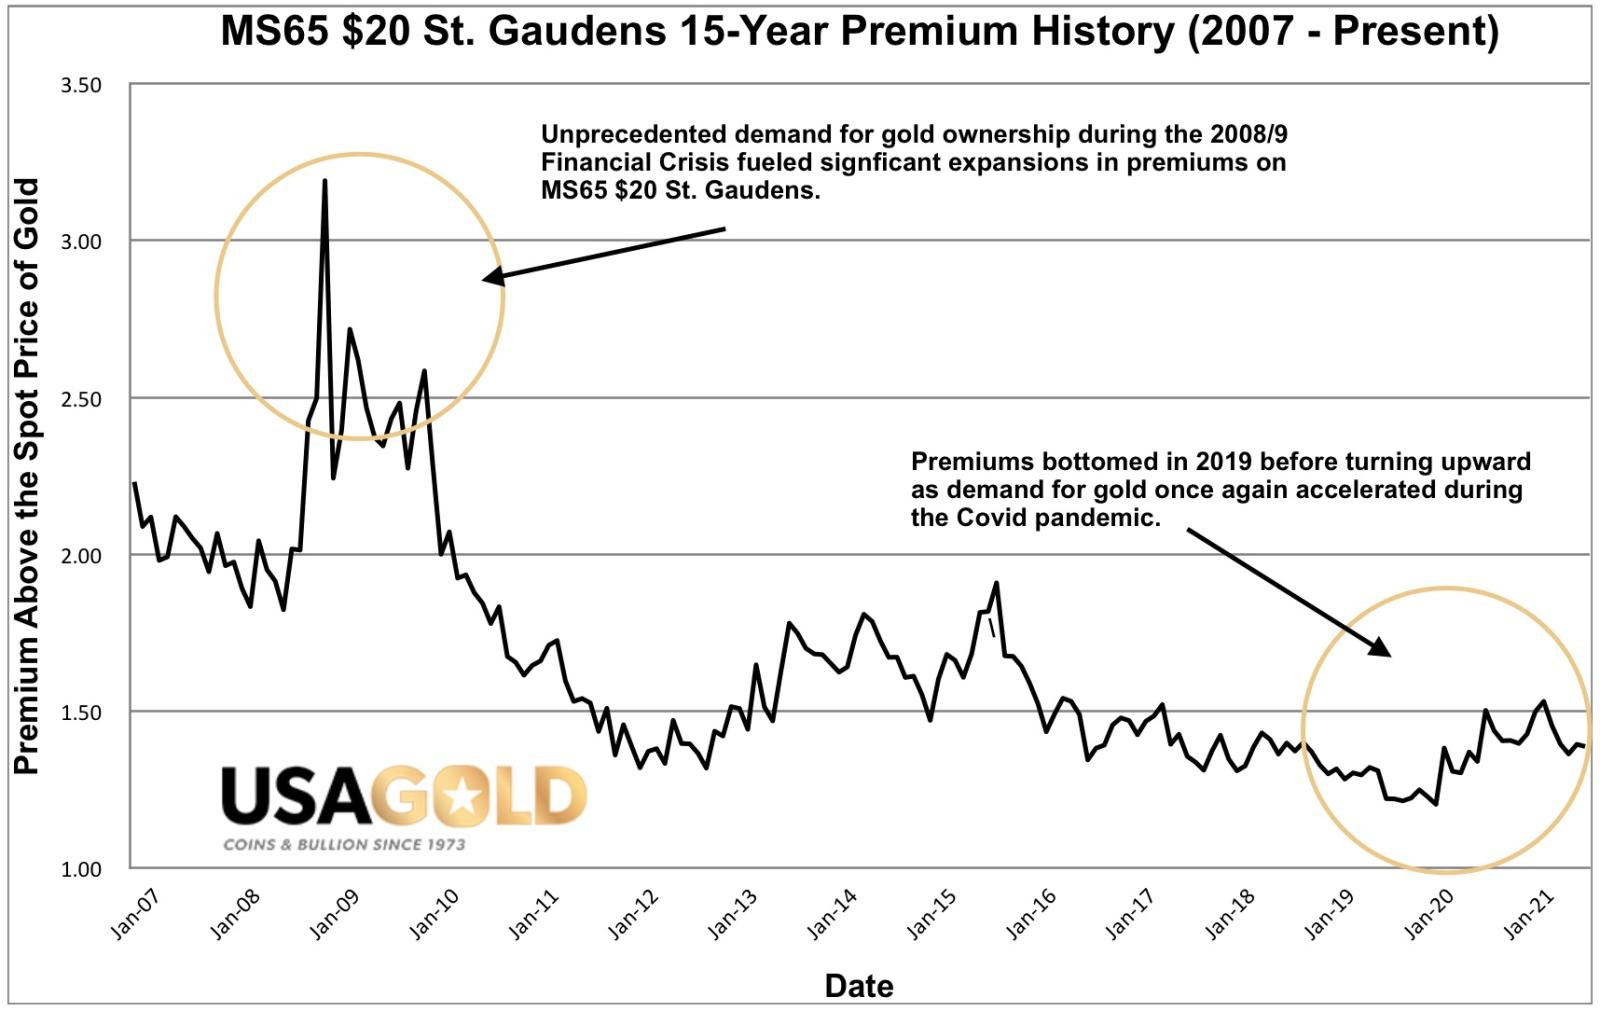 Graph of the premium history for MS65 $20 St. Gaudens. Premiums represent the value the coins carry above the spot price of gold